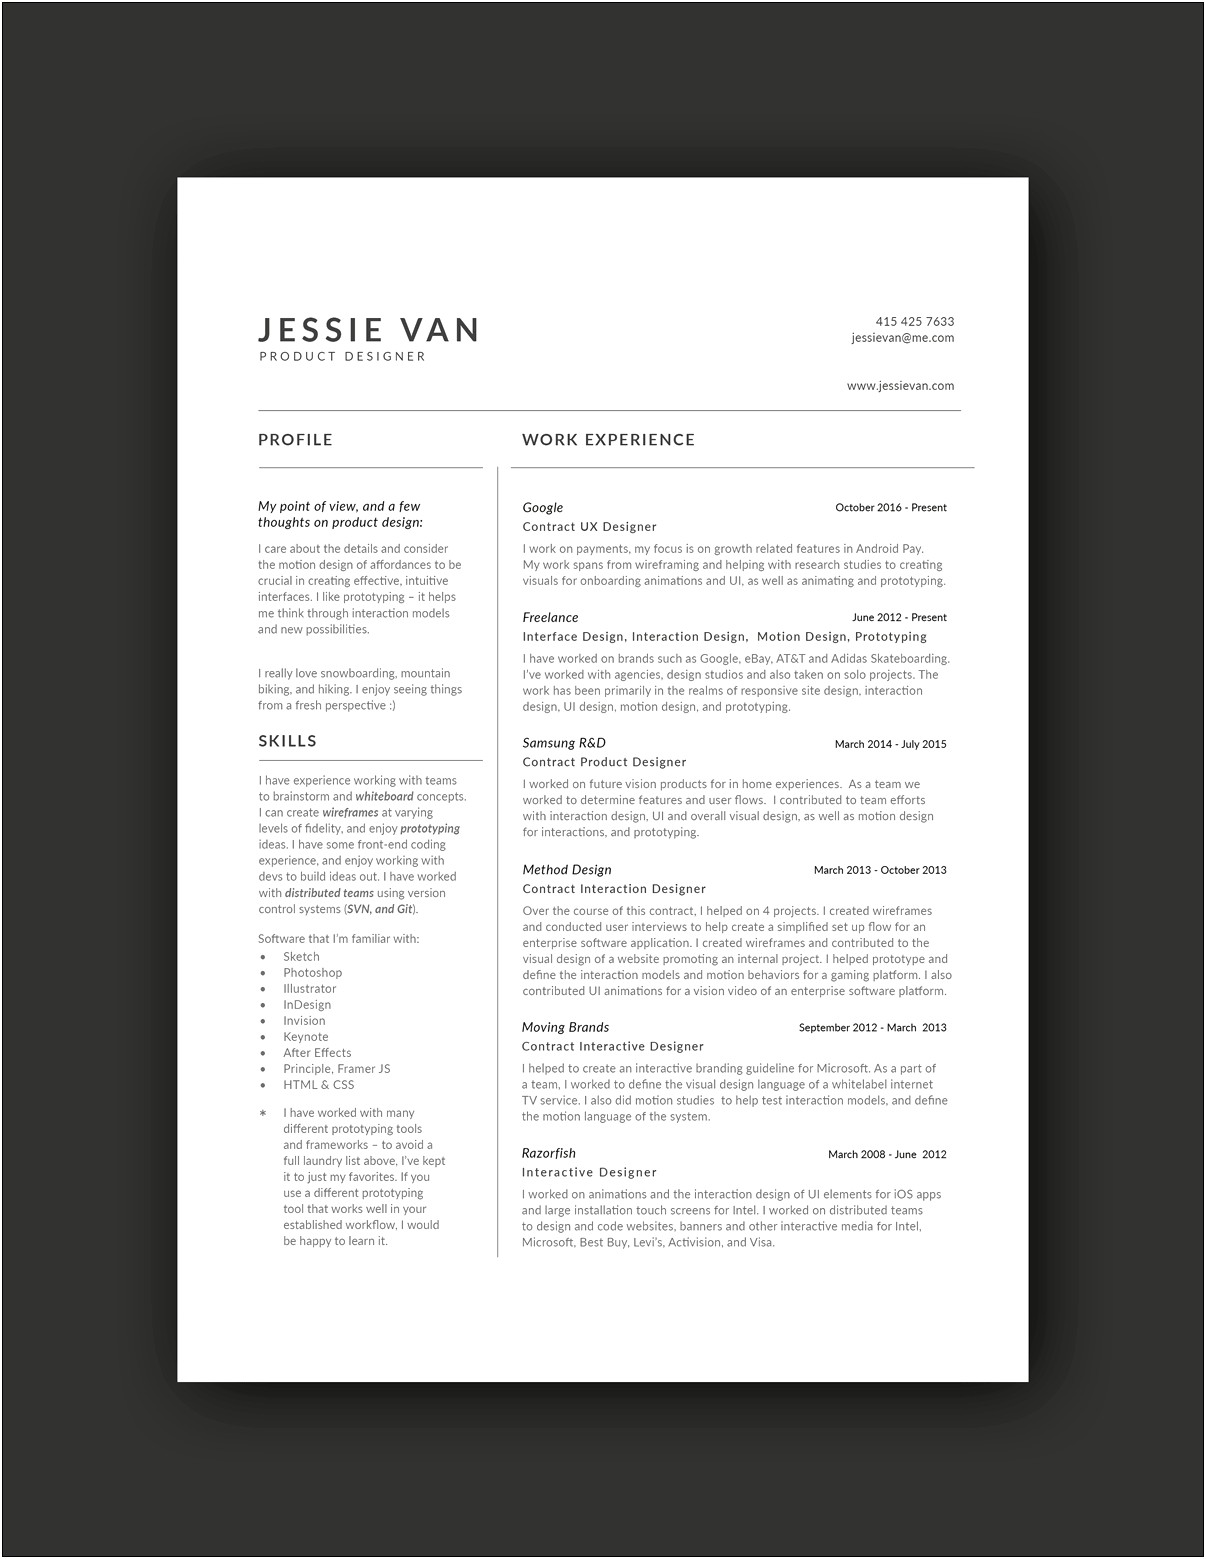 Resume Working As Part Of A Team